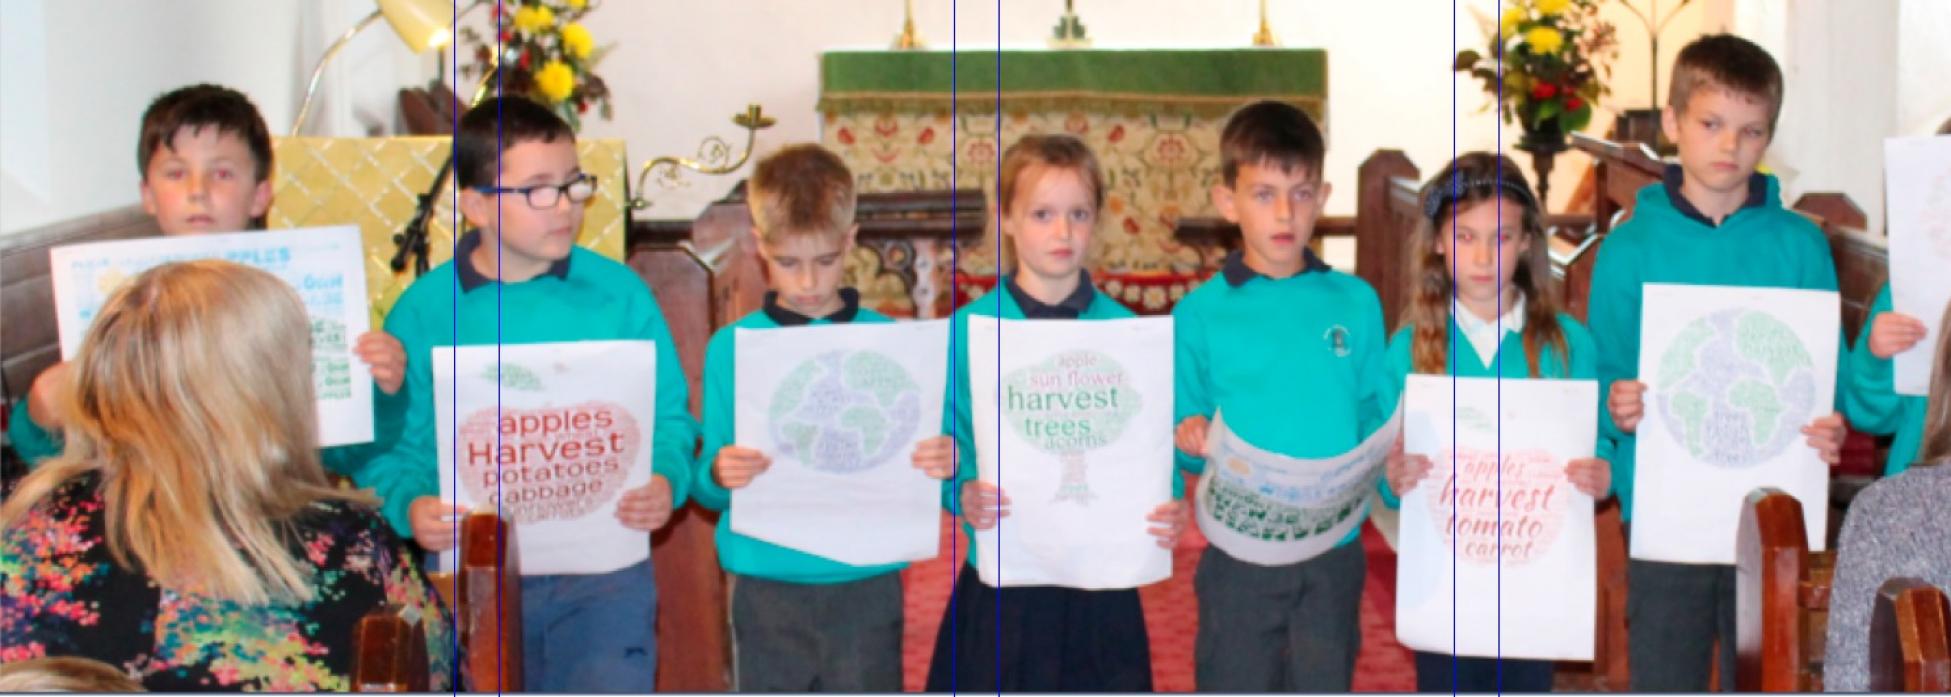 BACK IN CHURCH: Children at Bowes school during the harvest services